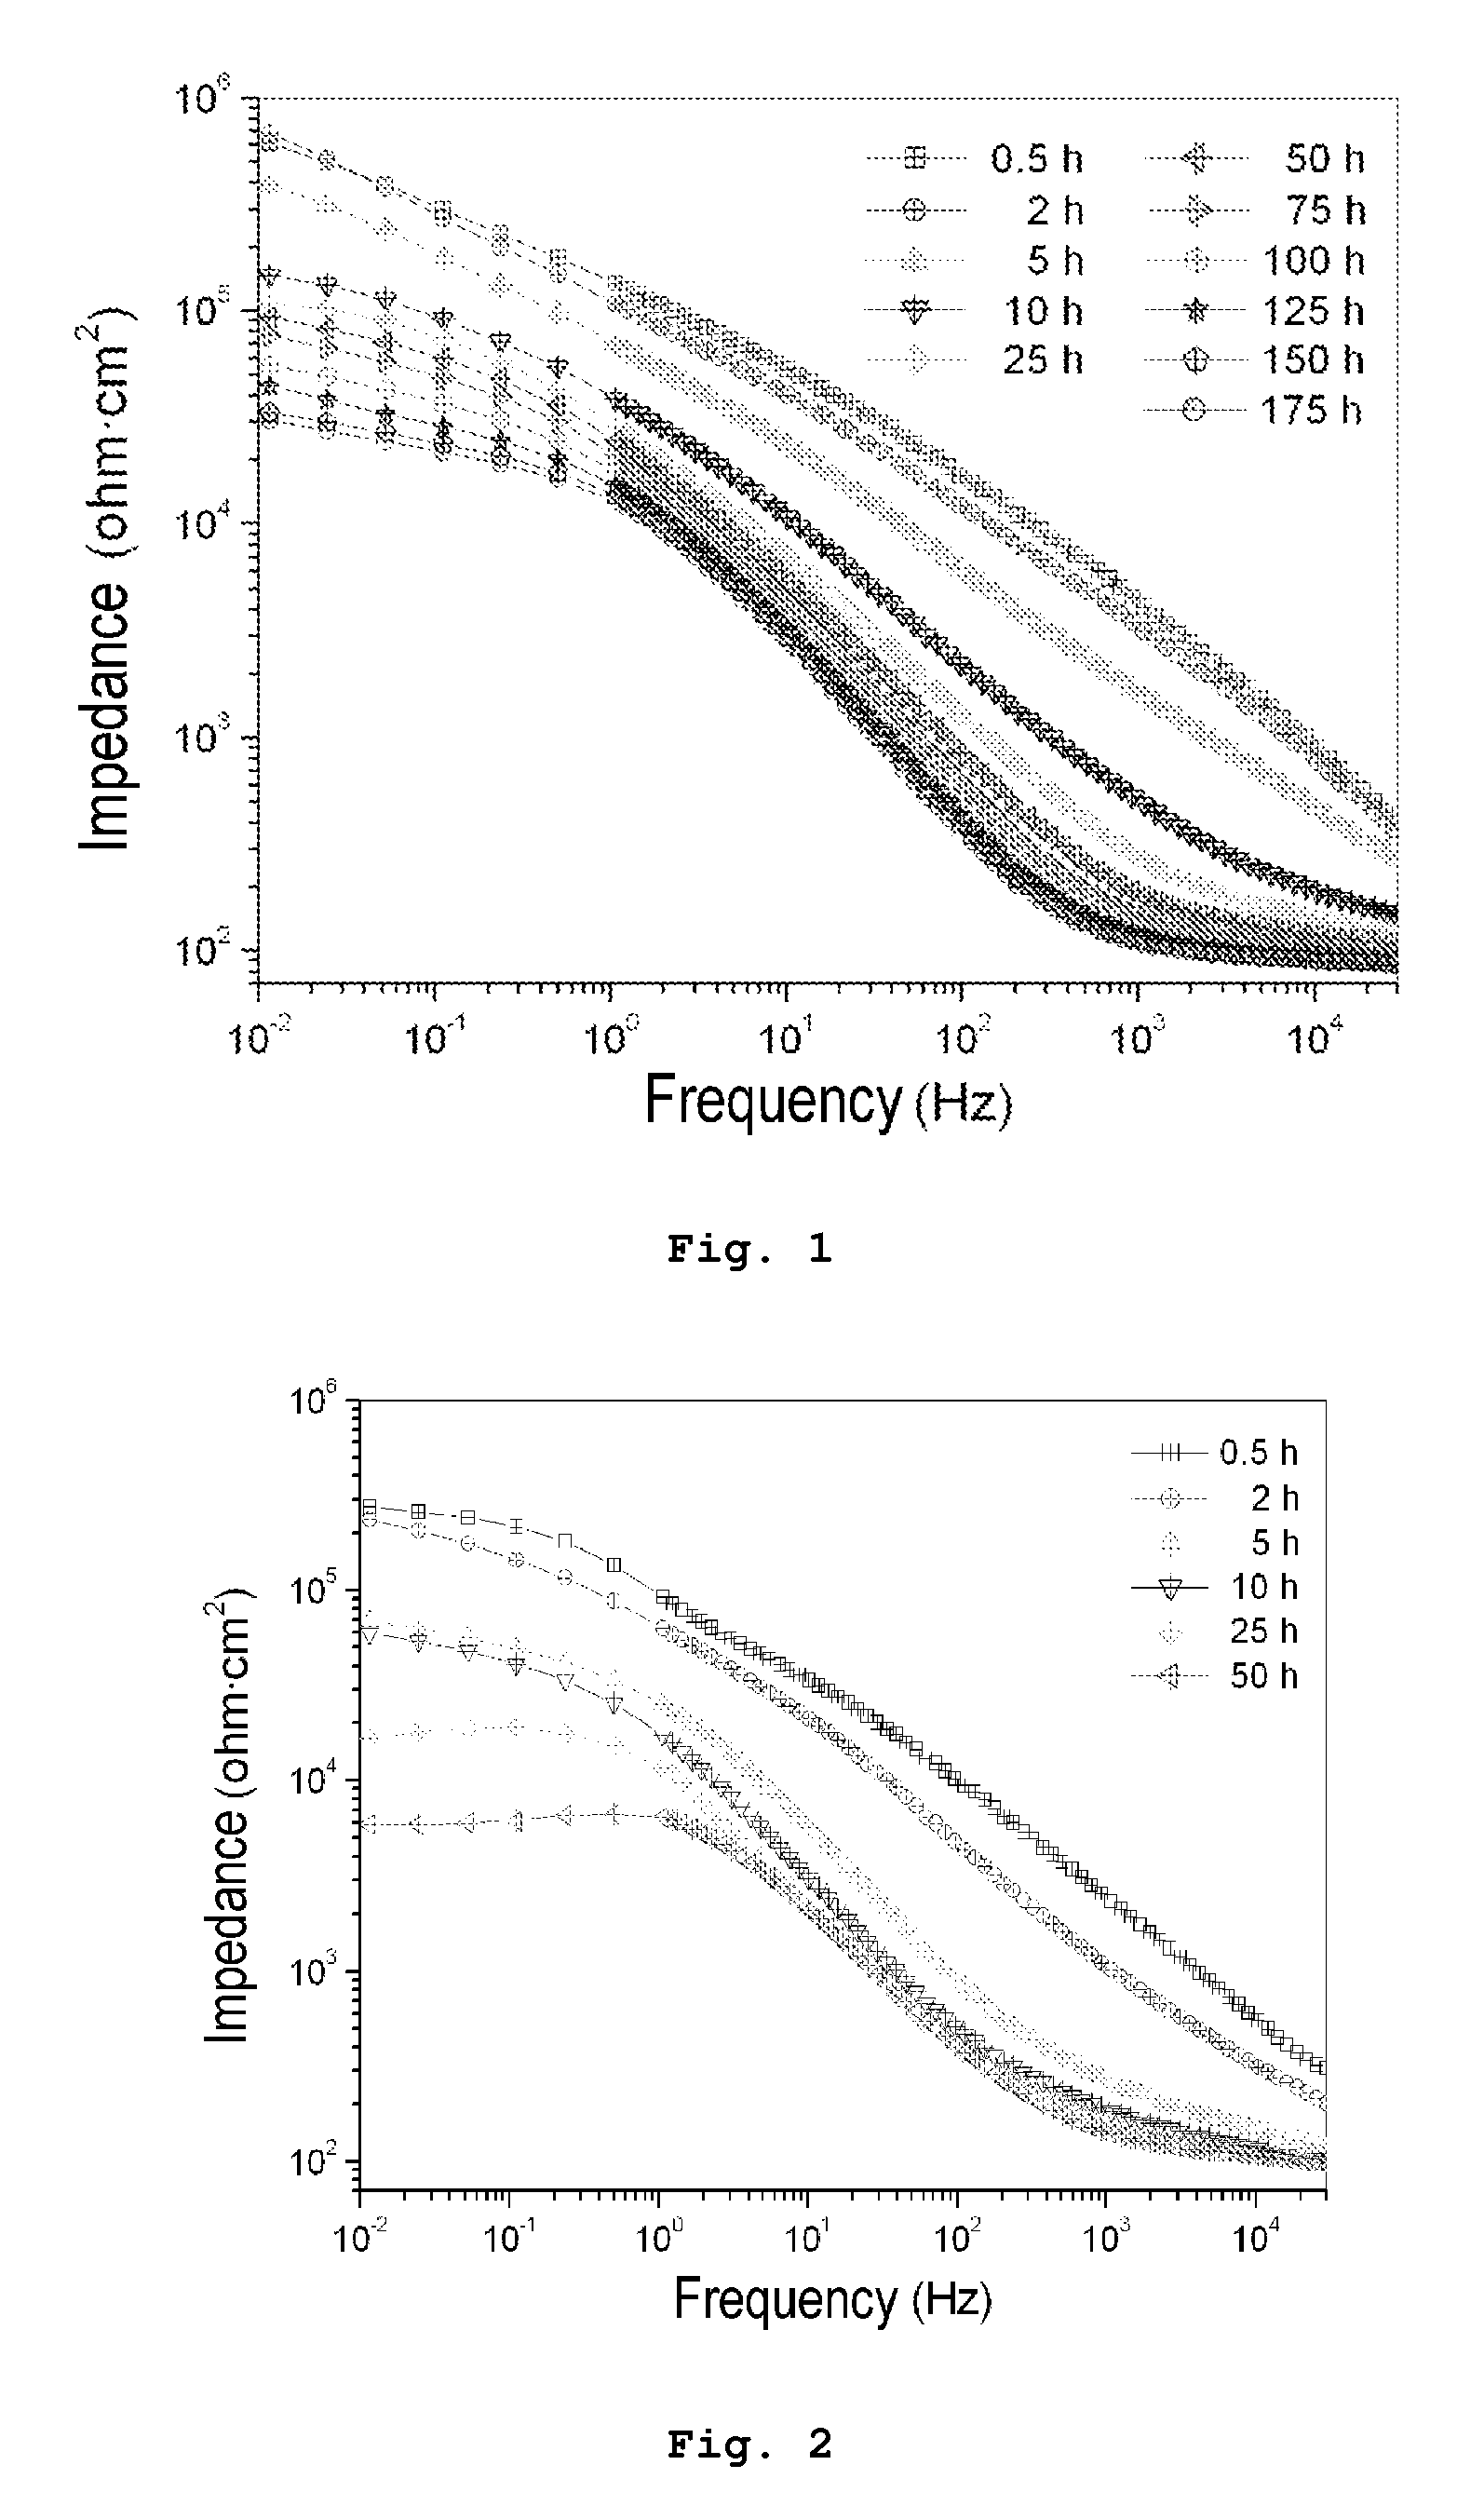 Process for producing a coating on the surface of a substrate based on lightweight metals by plasma-electrolytic oxidation